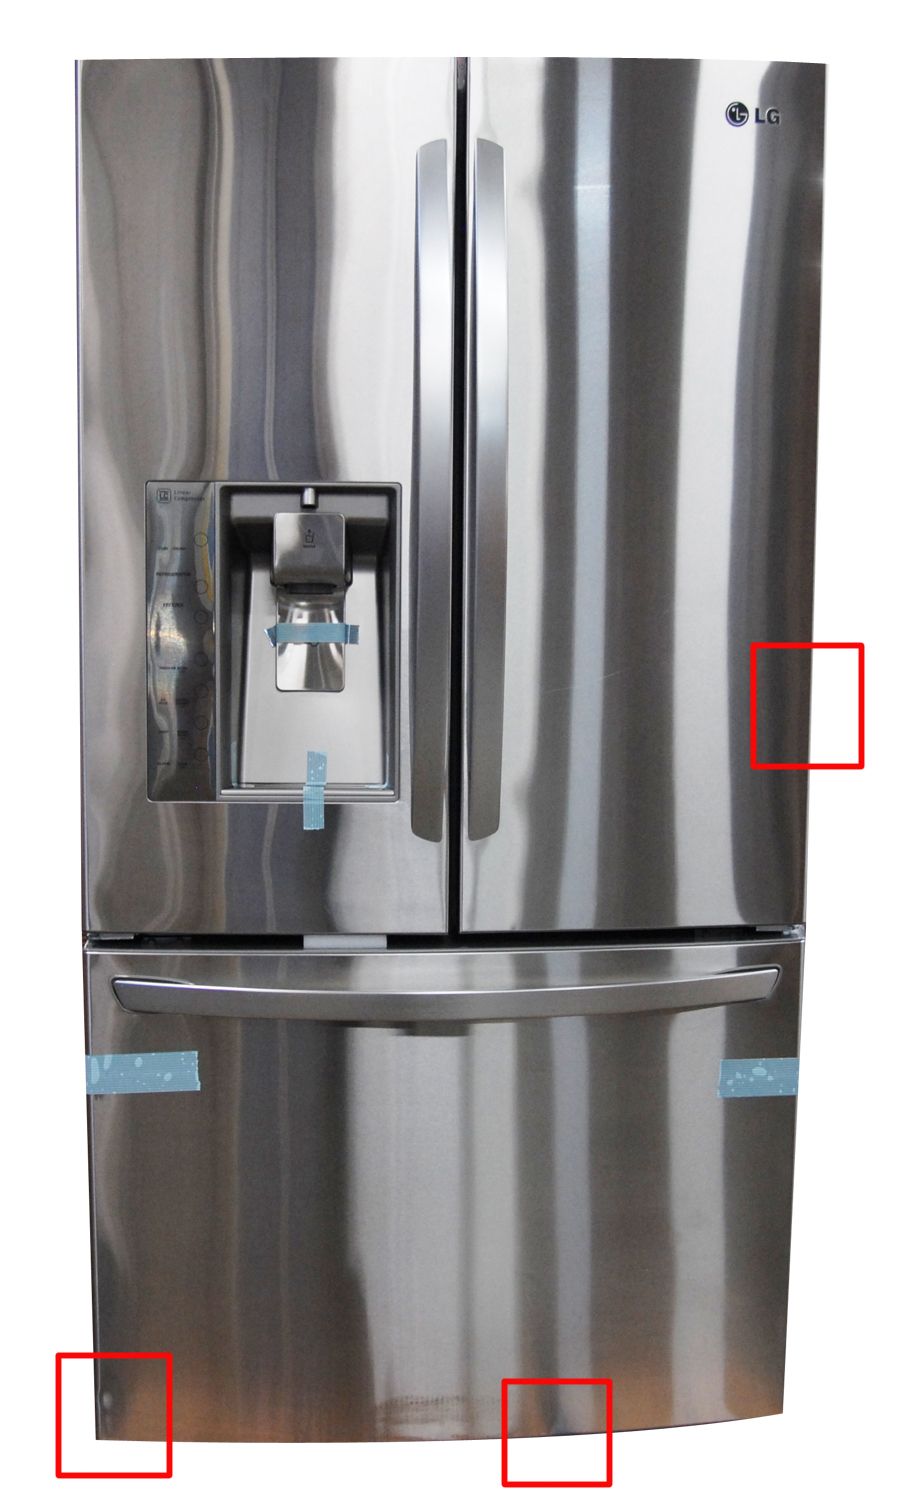 LG 25.0 Cu. Ft. Counter Depth Stainless French Door Refrigerator